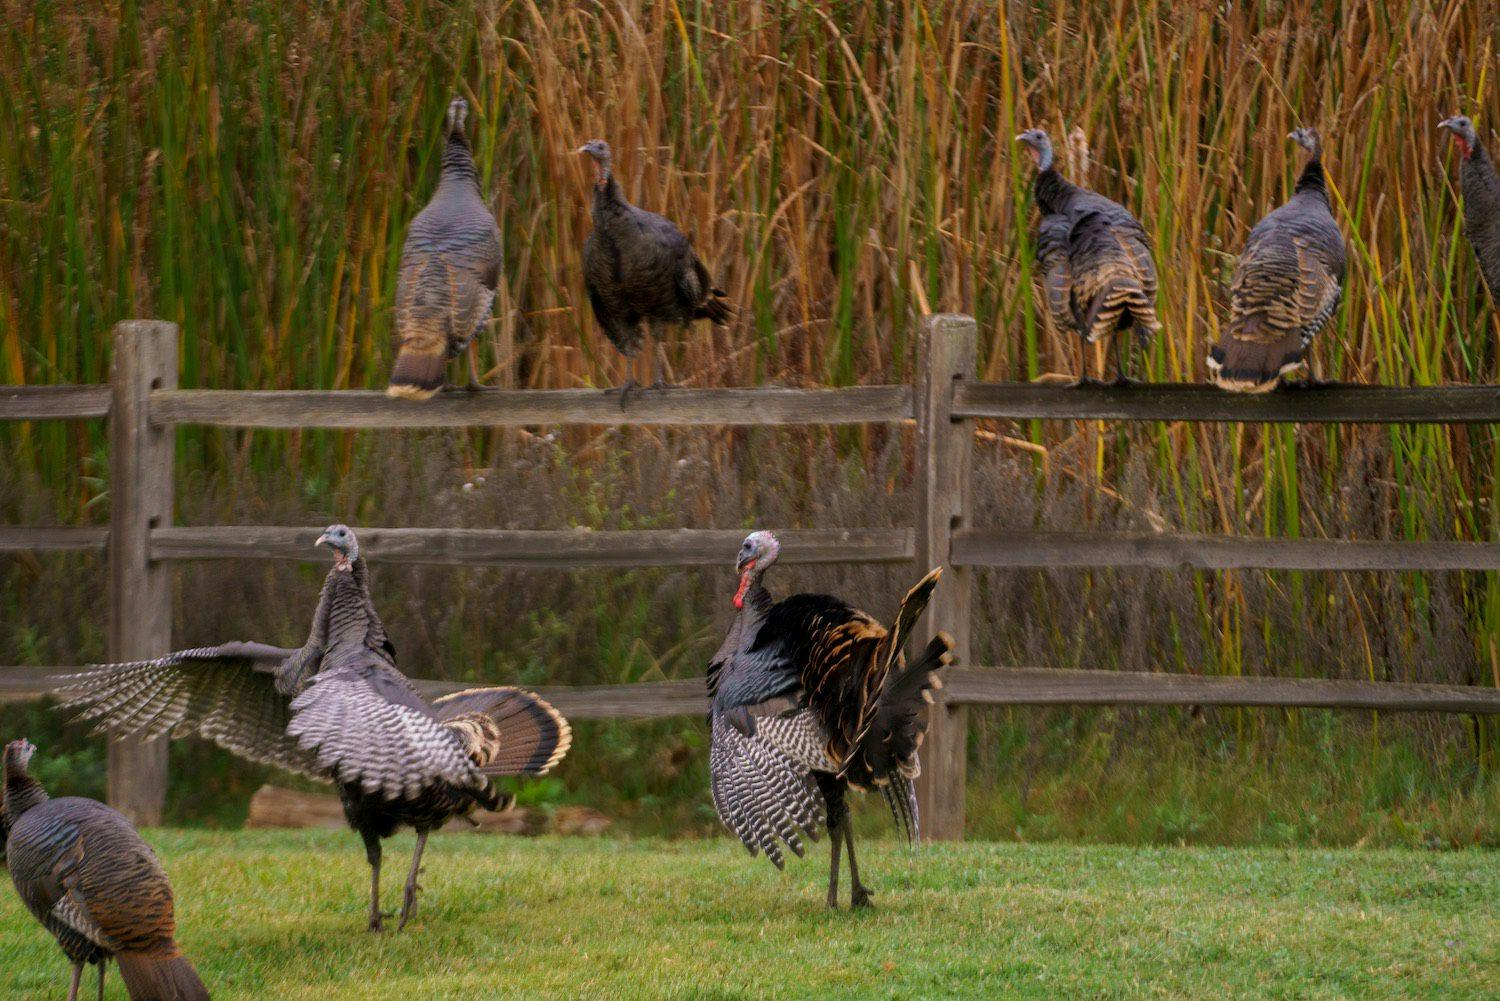 bunch of turkeys standing on the grass and fence